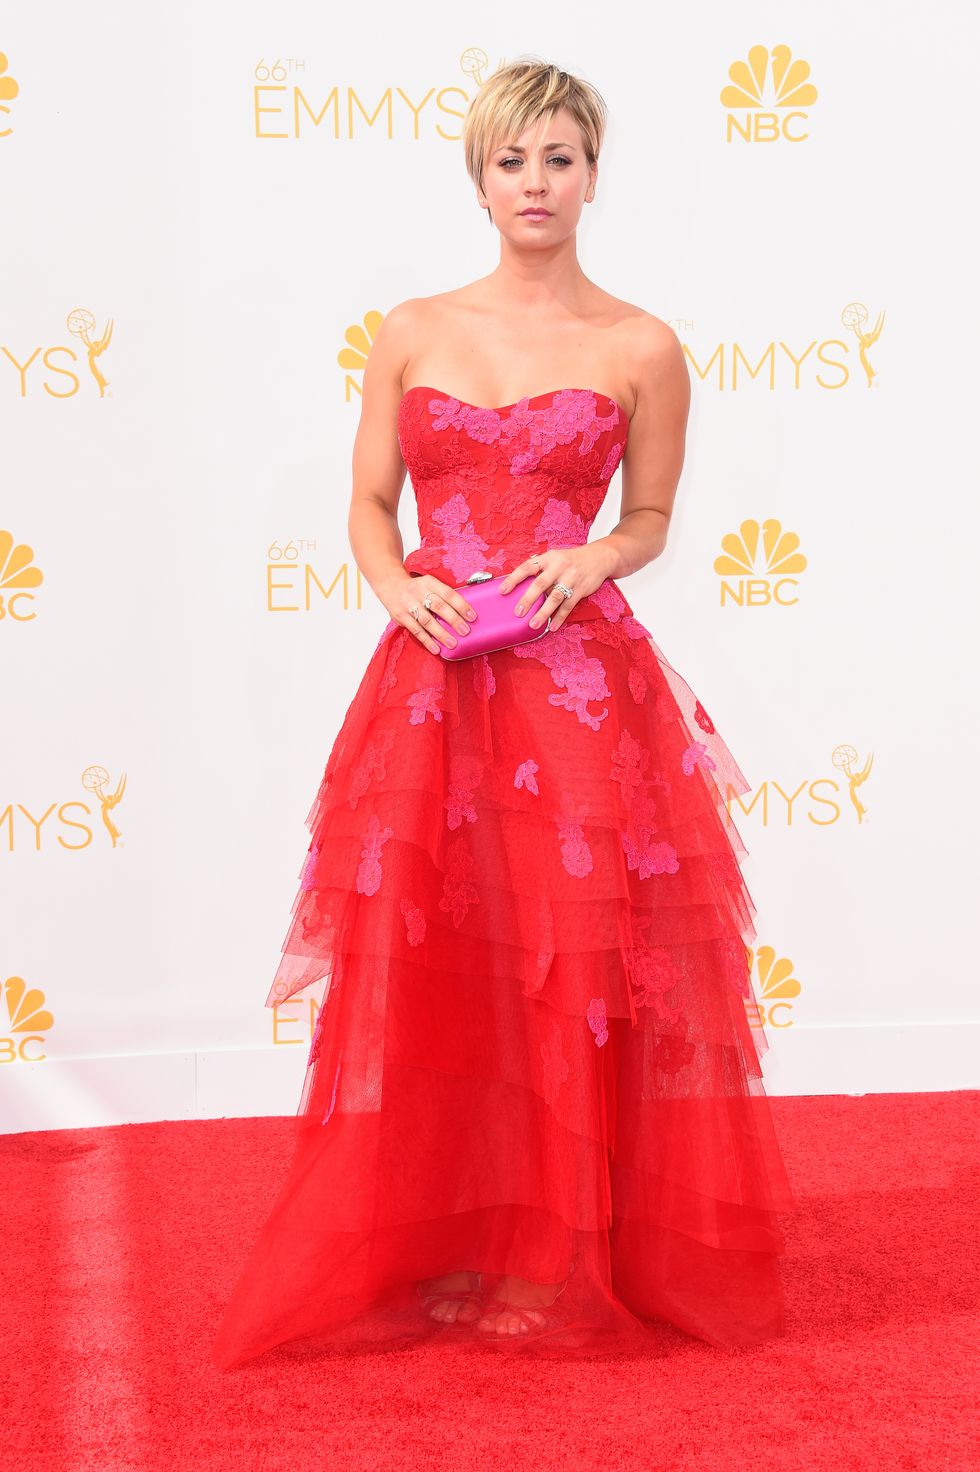 Kaley Cuoco wears gorgeous frilly dress at the Emmy Awards 2014